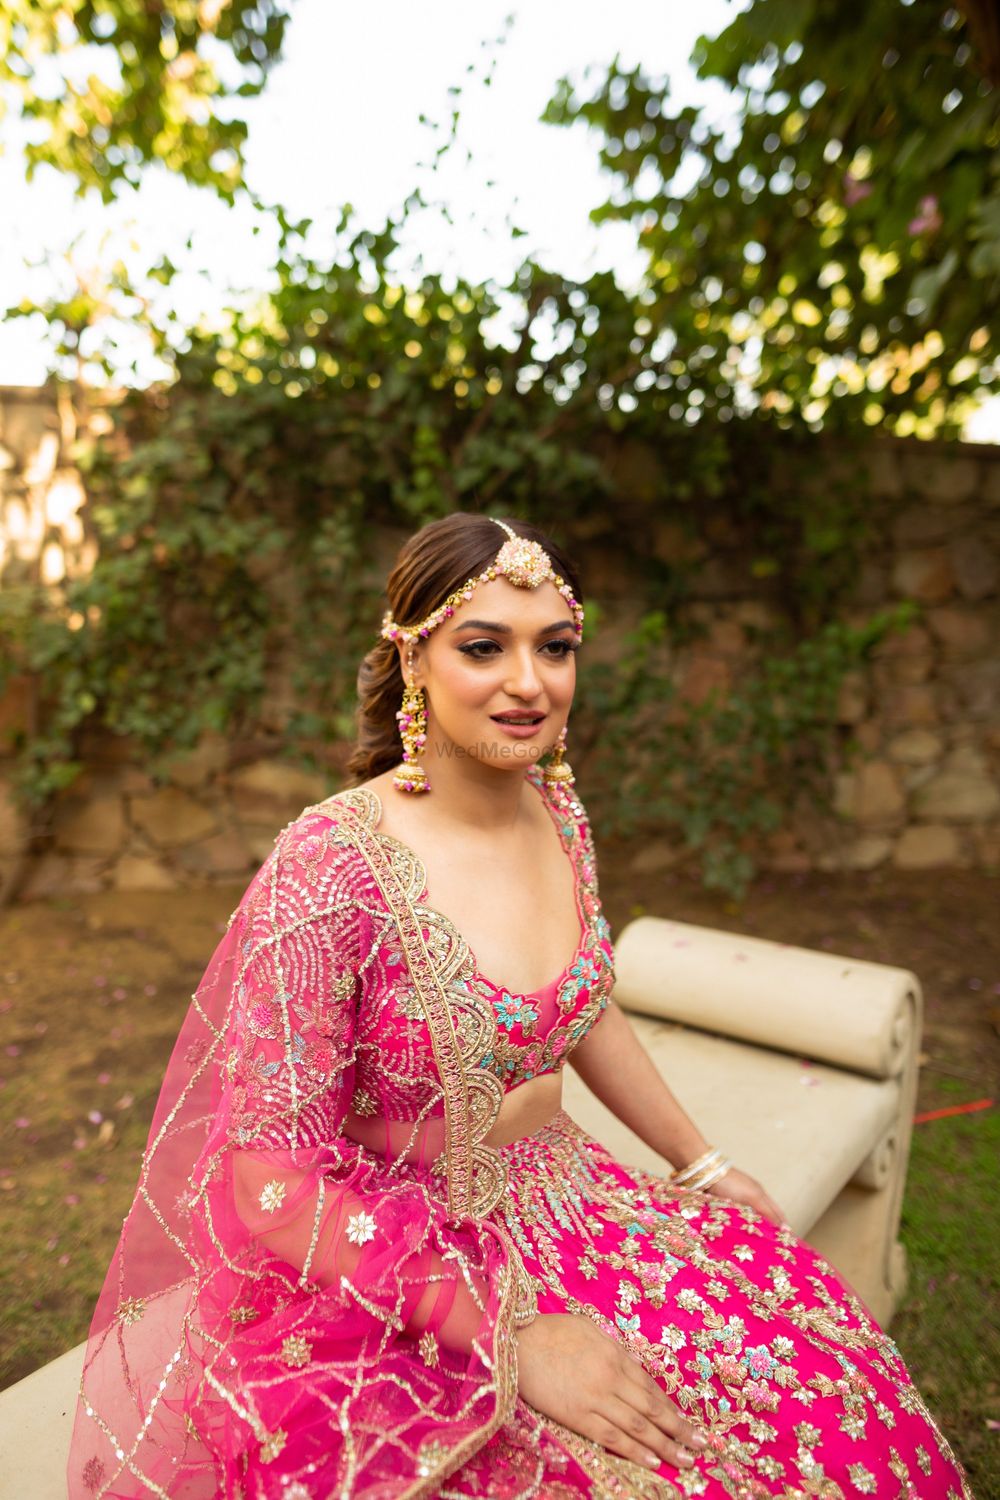 Photo From Mehendi-Haldi - By Makeover by Indu